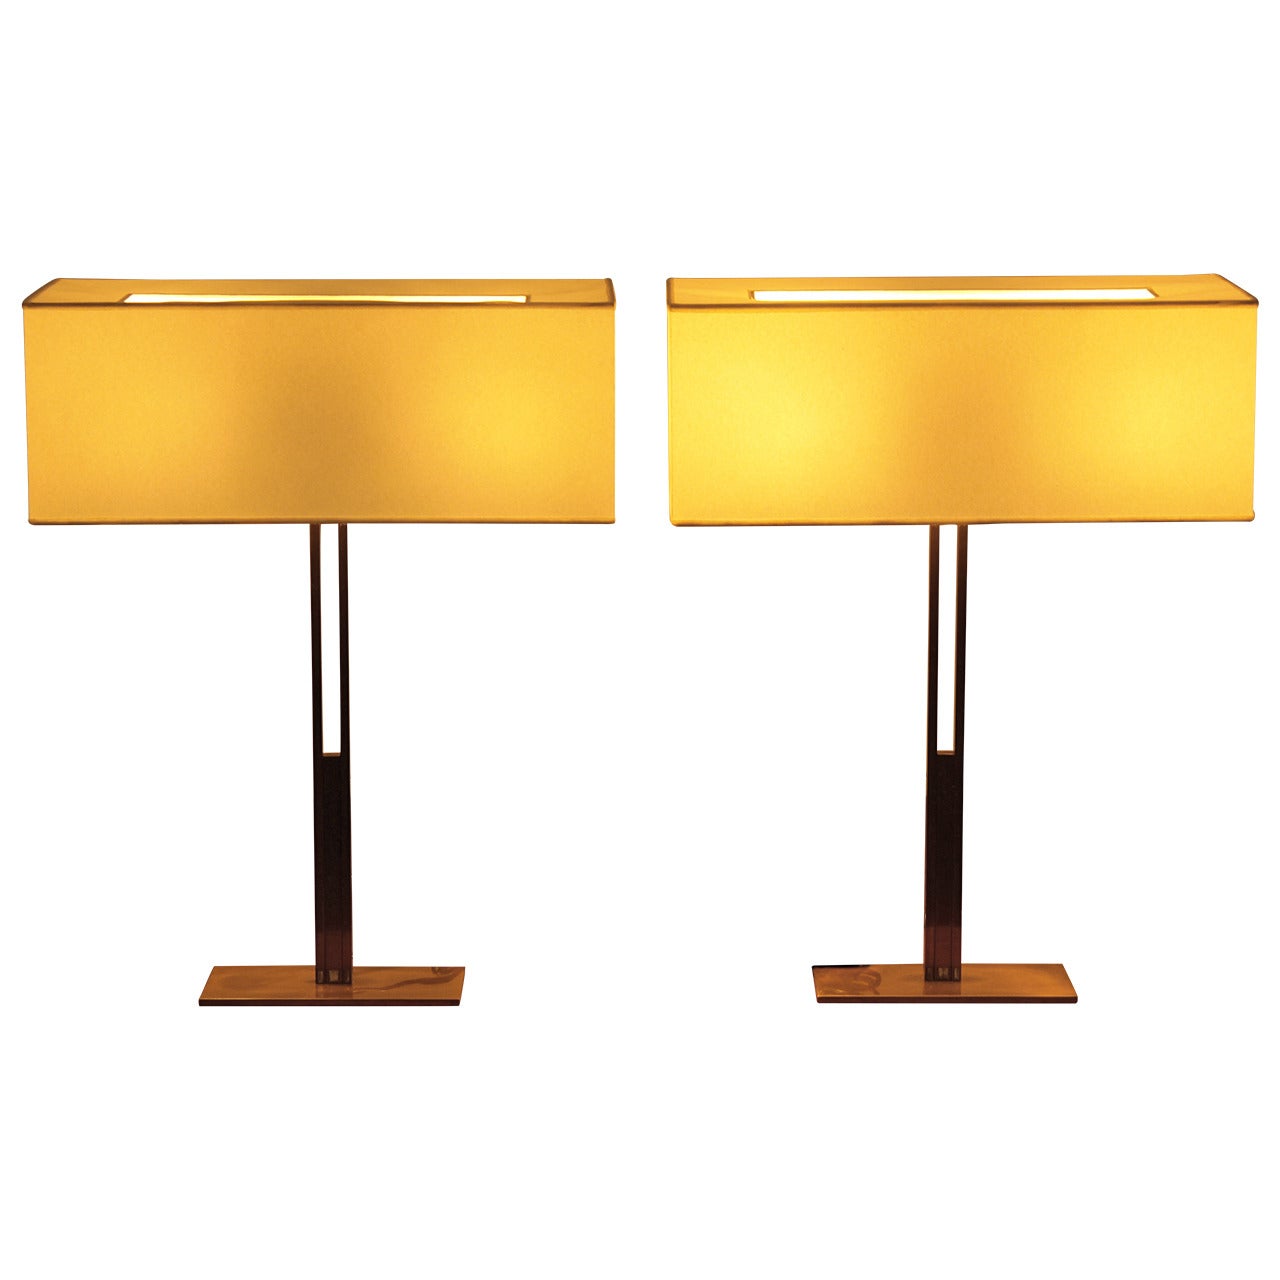 Pair of Christian Liaigre "Canisse" Table Lamps for Holly Hunt